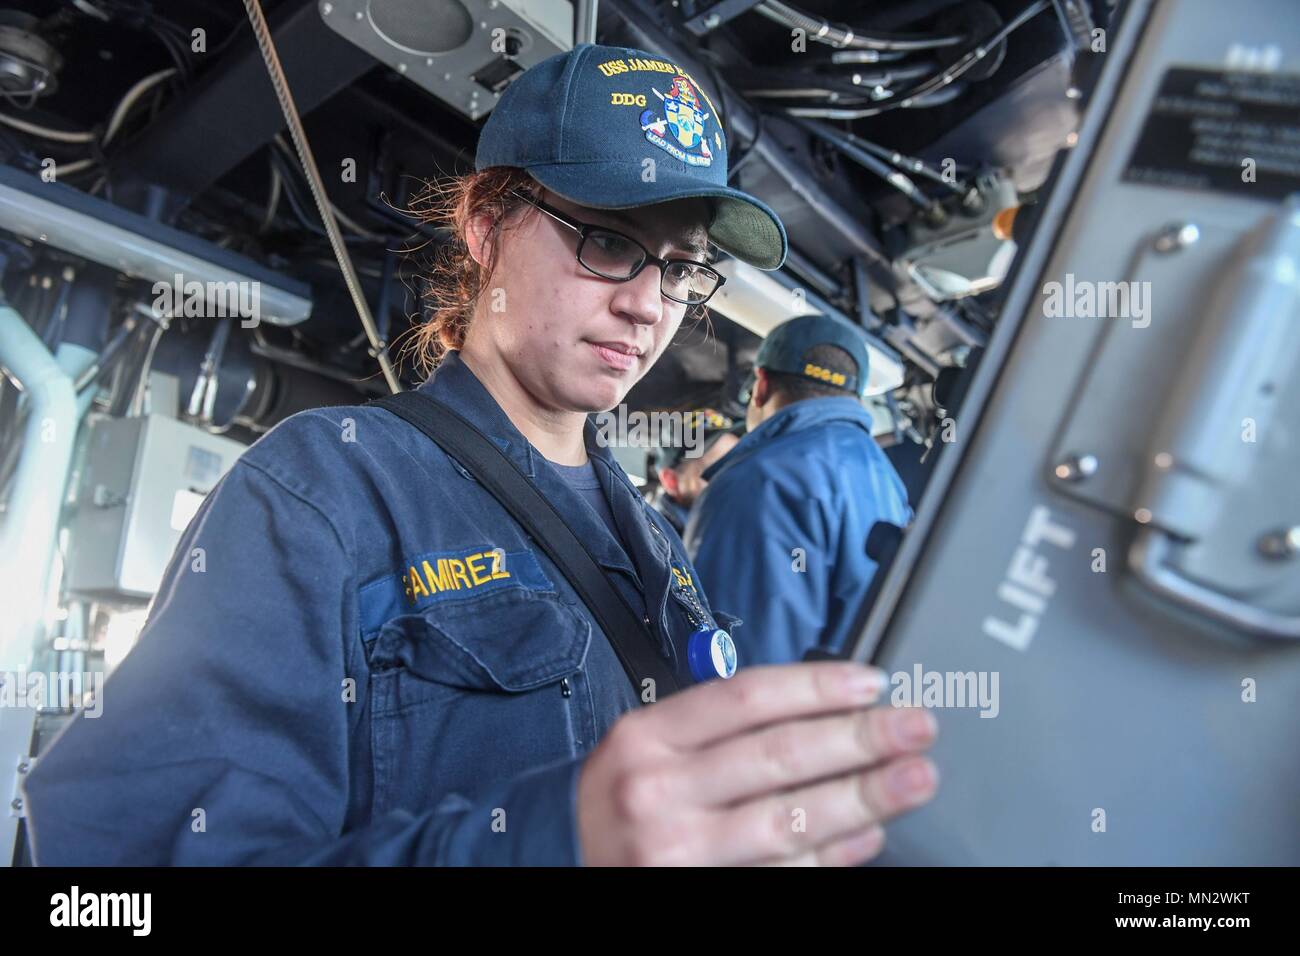 170822-N-GX781-191 SKAGERRAK STRAIT (Aug. 22, 2017) - Ensign Paris Bess, from Troy, Ohio, scans the horizon with binoculars aboard the Arleigh Burke-class guided-missile destroyer USS James E. Williams (DDG 95) as the ship transits the Skagerrak Strait Aug. 22, 2017.  James E. Williams, home-ported in Norfolk, is on a routine deployment to the U.S. 6th Fleet area of operations in support of U.S. national security interests in Europe. (U.S. Navy photo by Mass Communication Specialist 3rd Class Colbey Livingston/ Released) Stock Photo